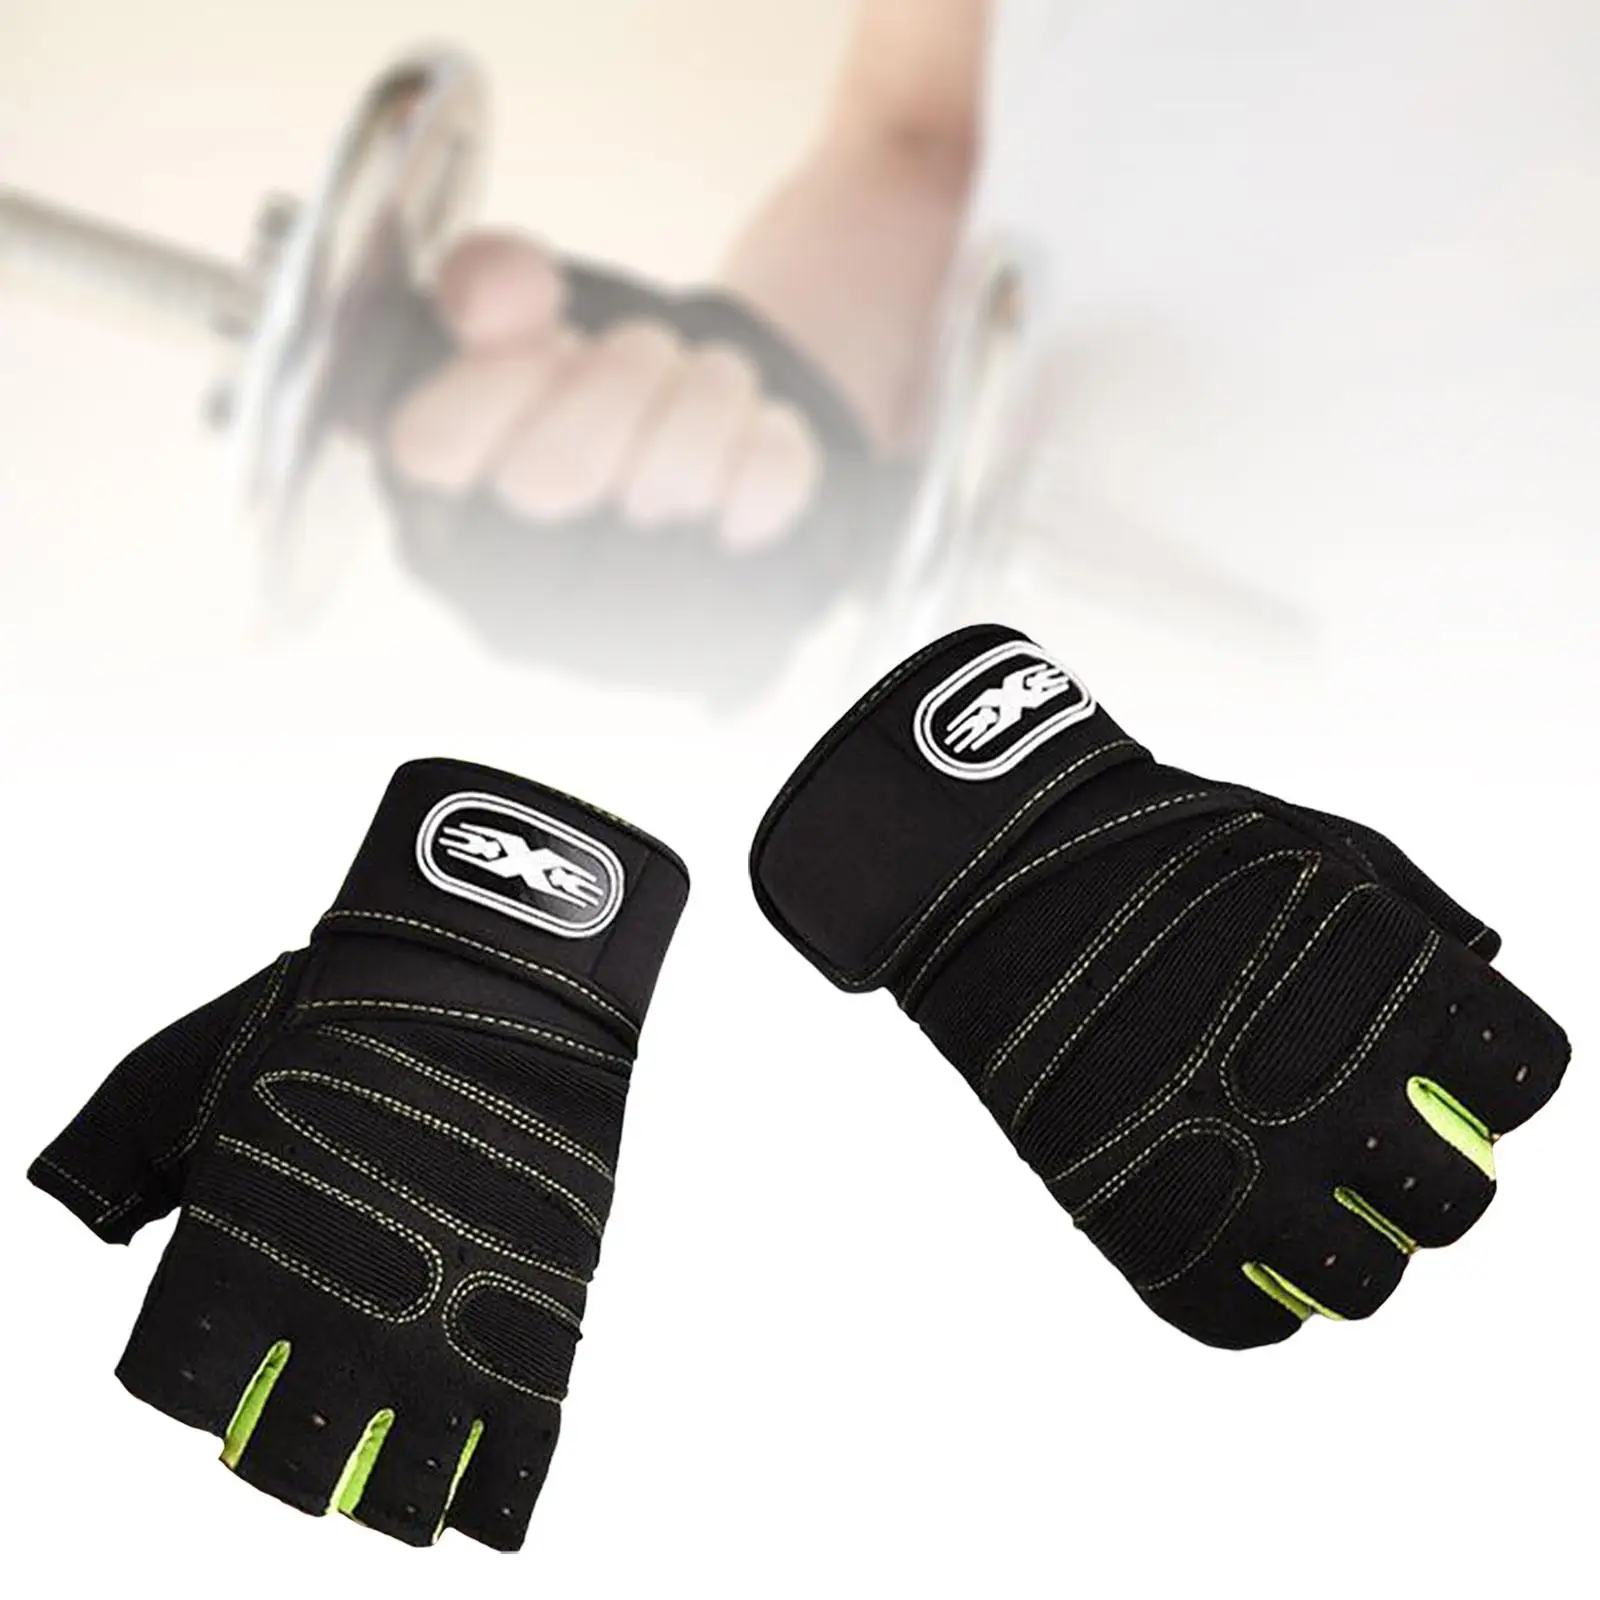 Weight Lifting Gloves Wrist Support Knit Pads Gym Gloves Wrist Twrist Straps for Training Dumbbell Pull Ups Fitness Powerlifting